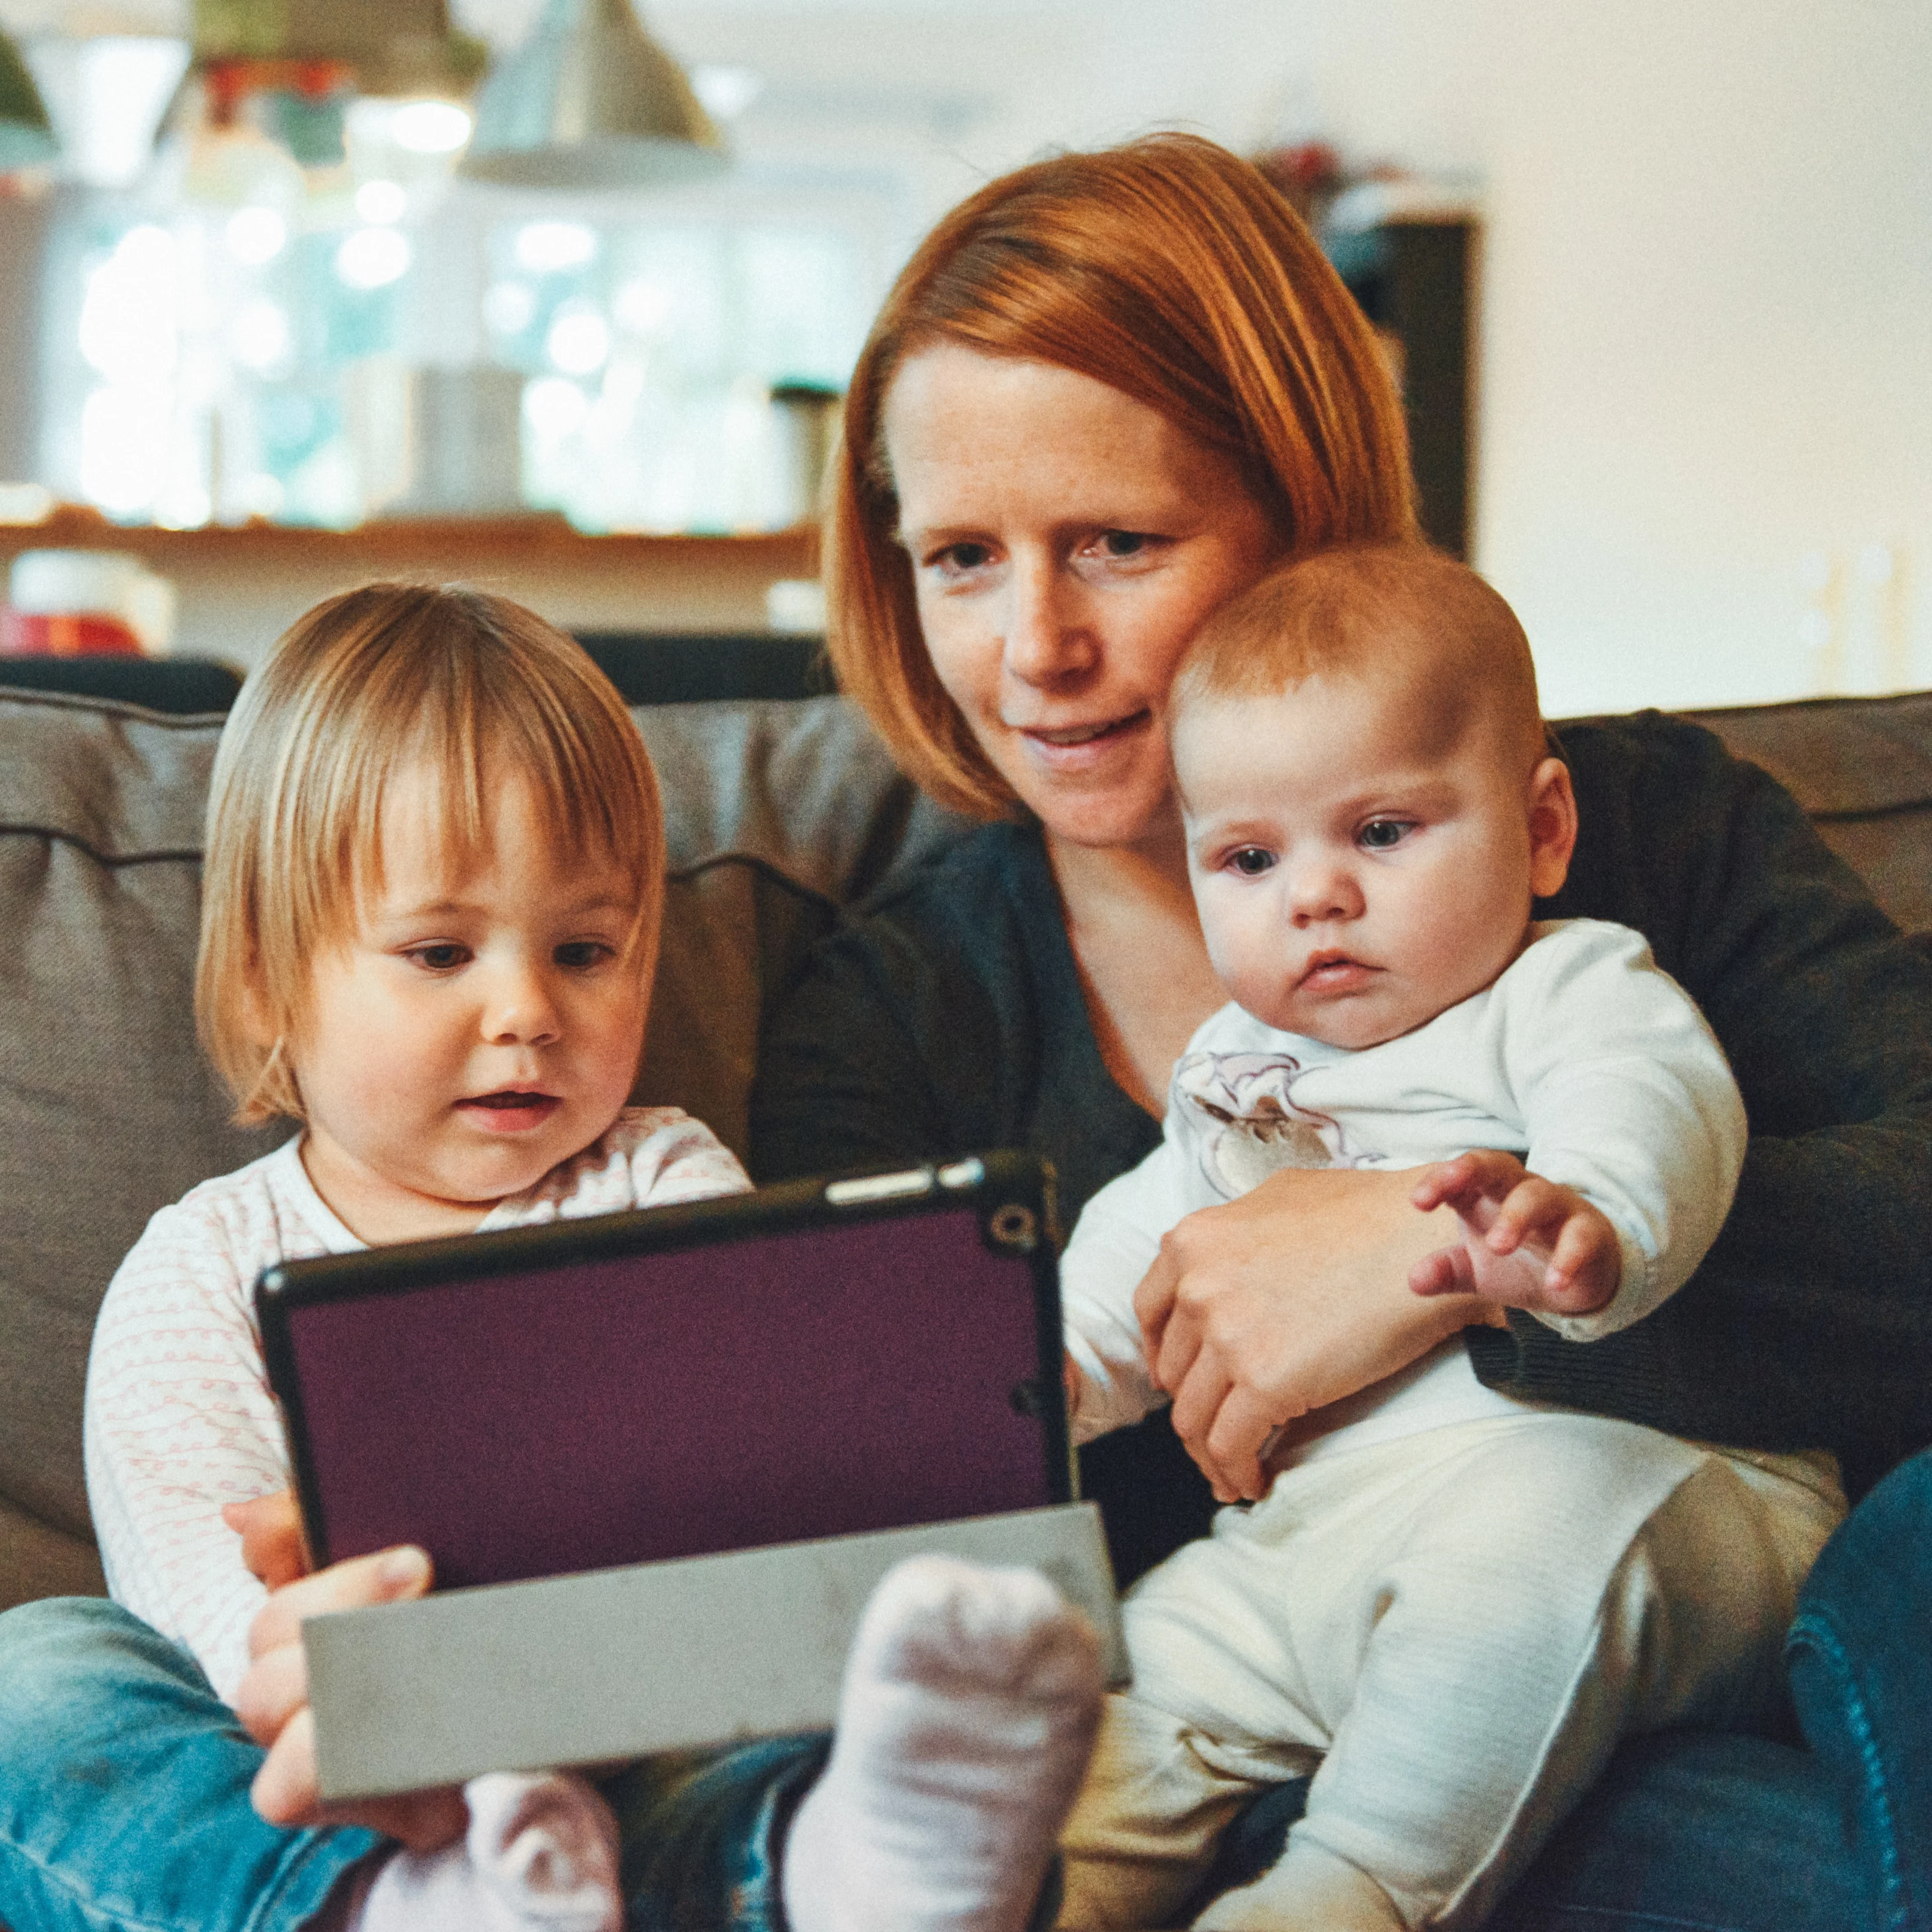 Woman sitting in couch with small child and baby looking at a tablet together